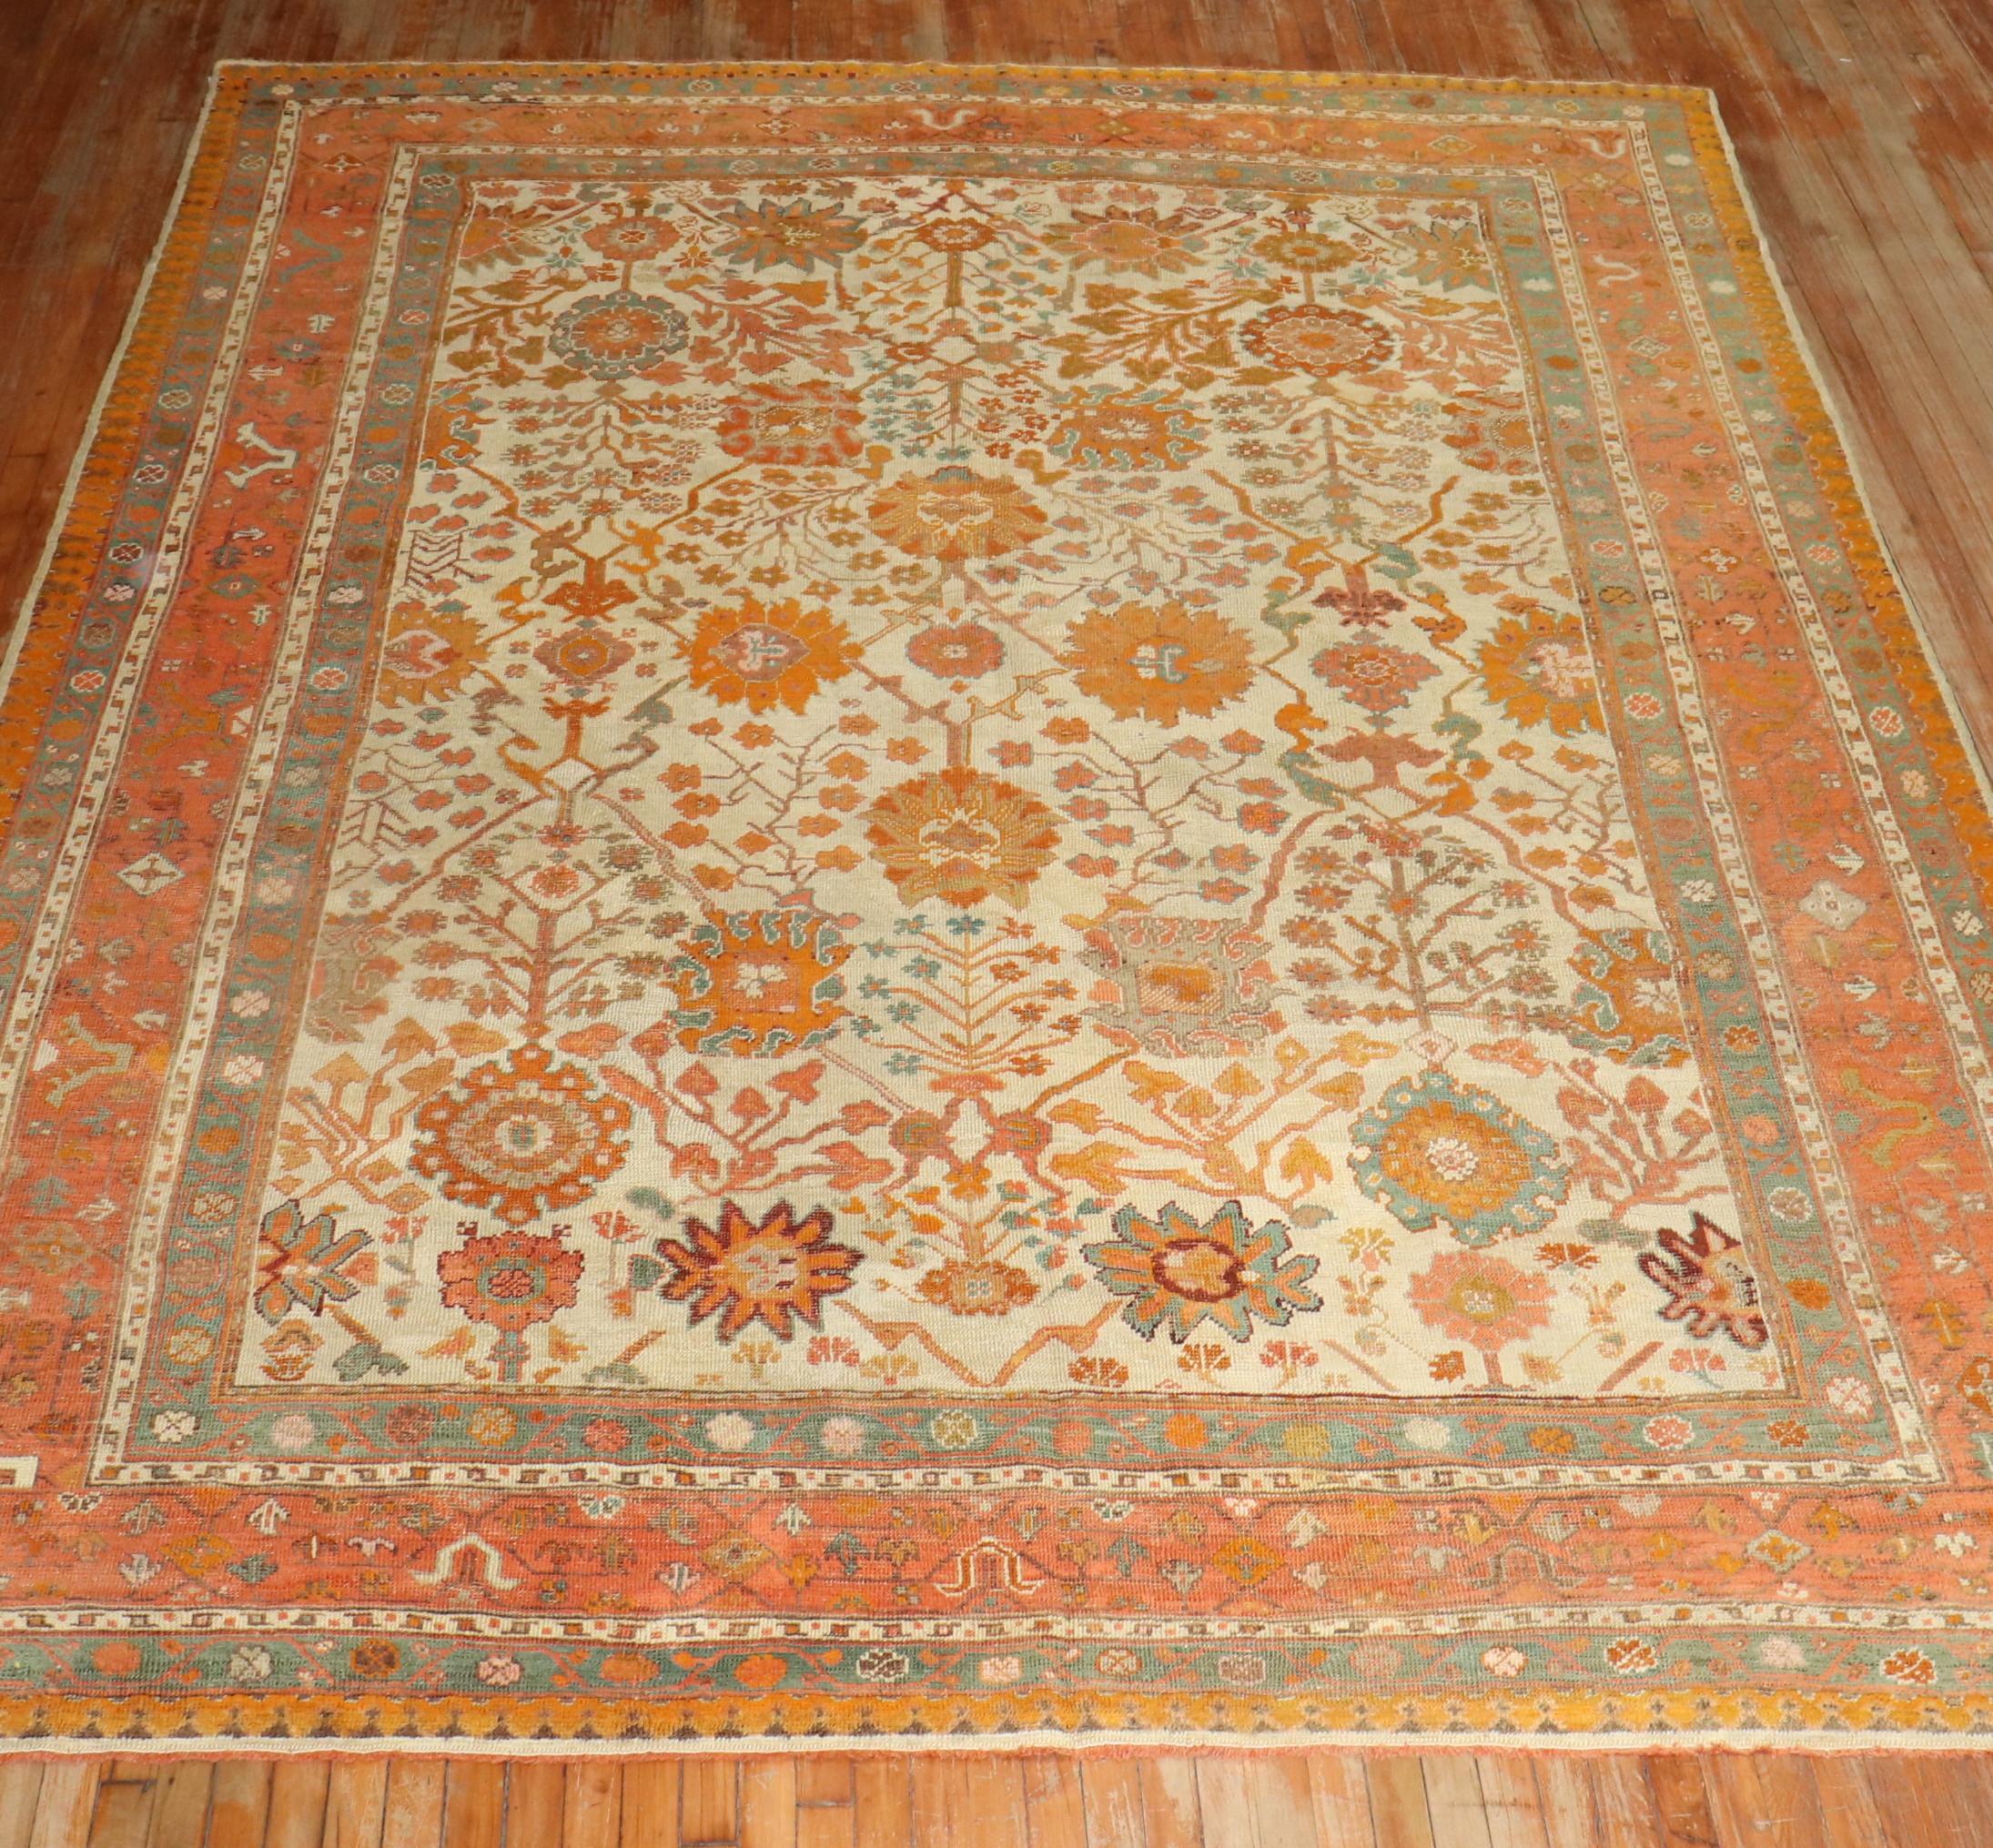 An early 20th-century room size Antique Turkish Oushak rug in predominantly ivory and orange with teal and brown highlights

Measures: 9'4'' x 11'

Oushak rugs originated in the small town of Oushak in west-central Anatolia, today just south of